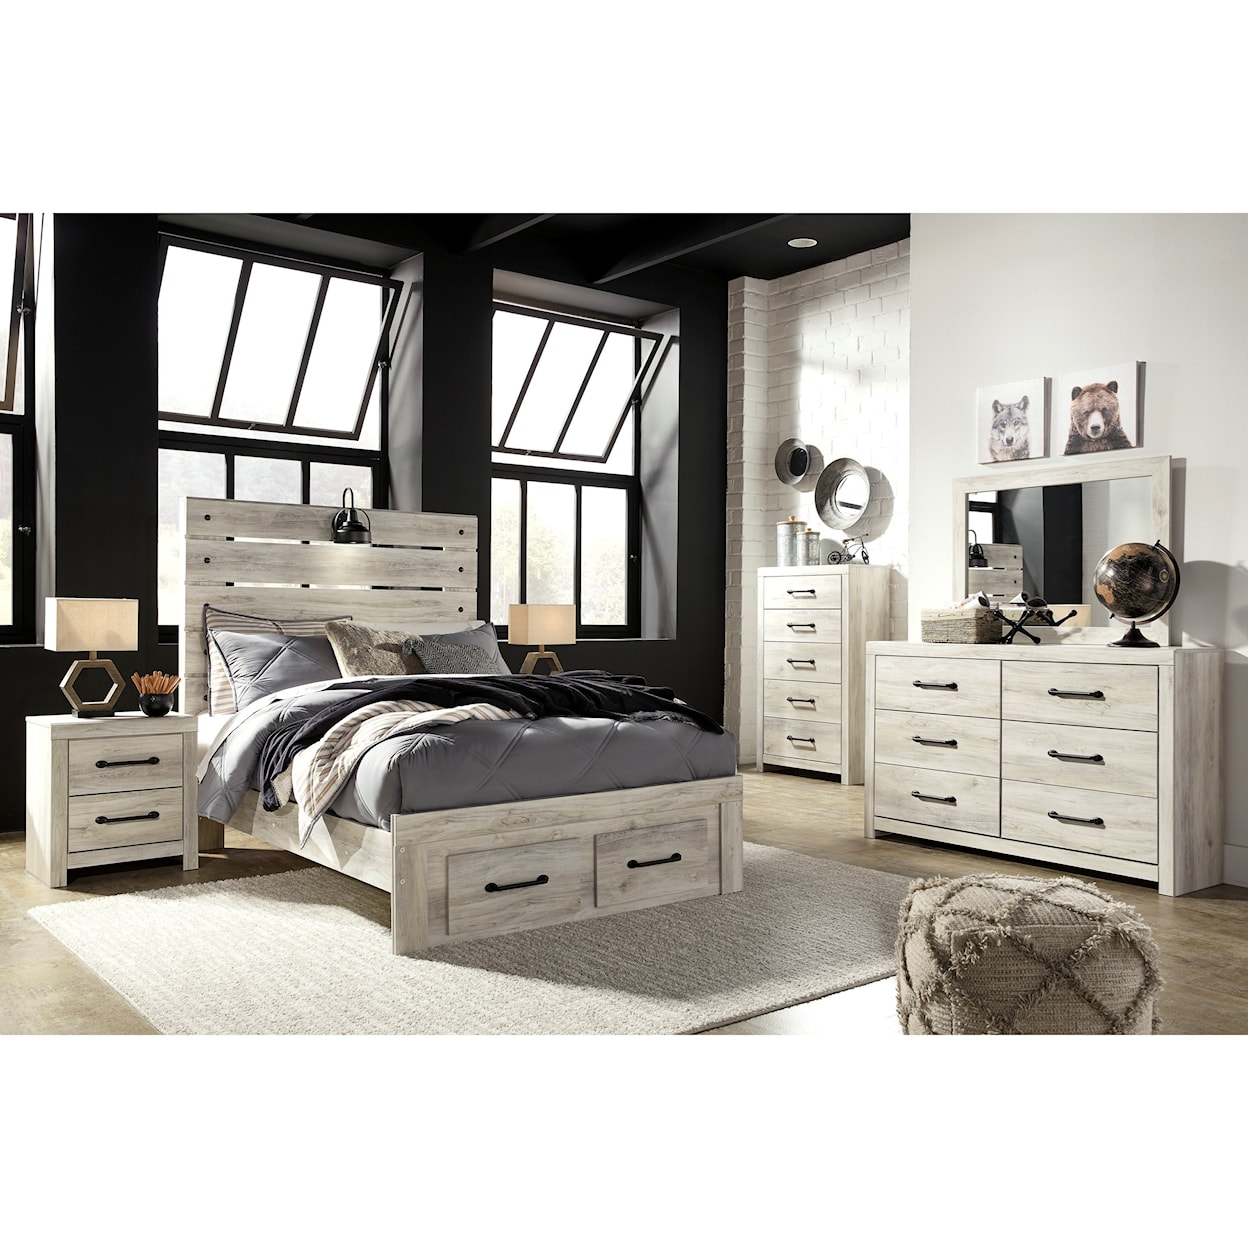 Ashley Furniture Signature Design Cambeck Full Bedroom Group